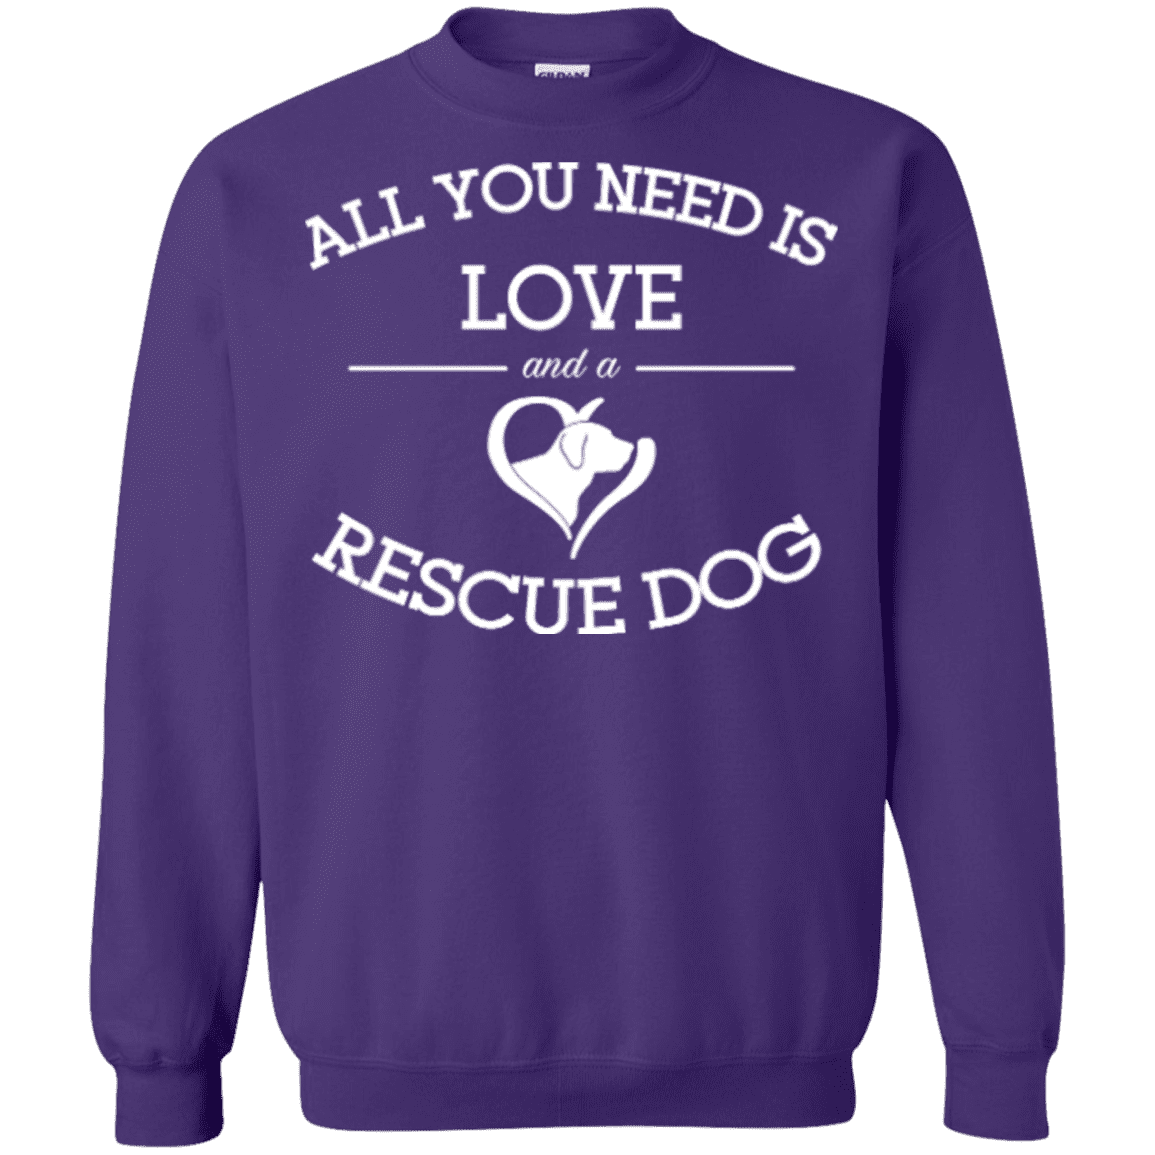 Love and a Rescue Dog - Sweatshirt.